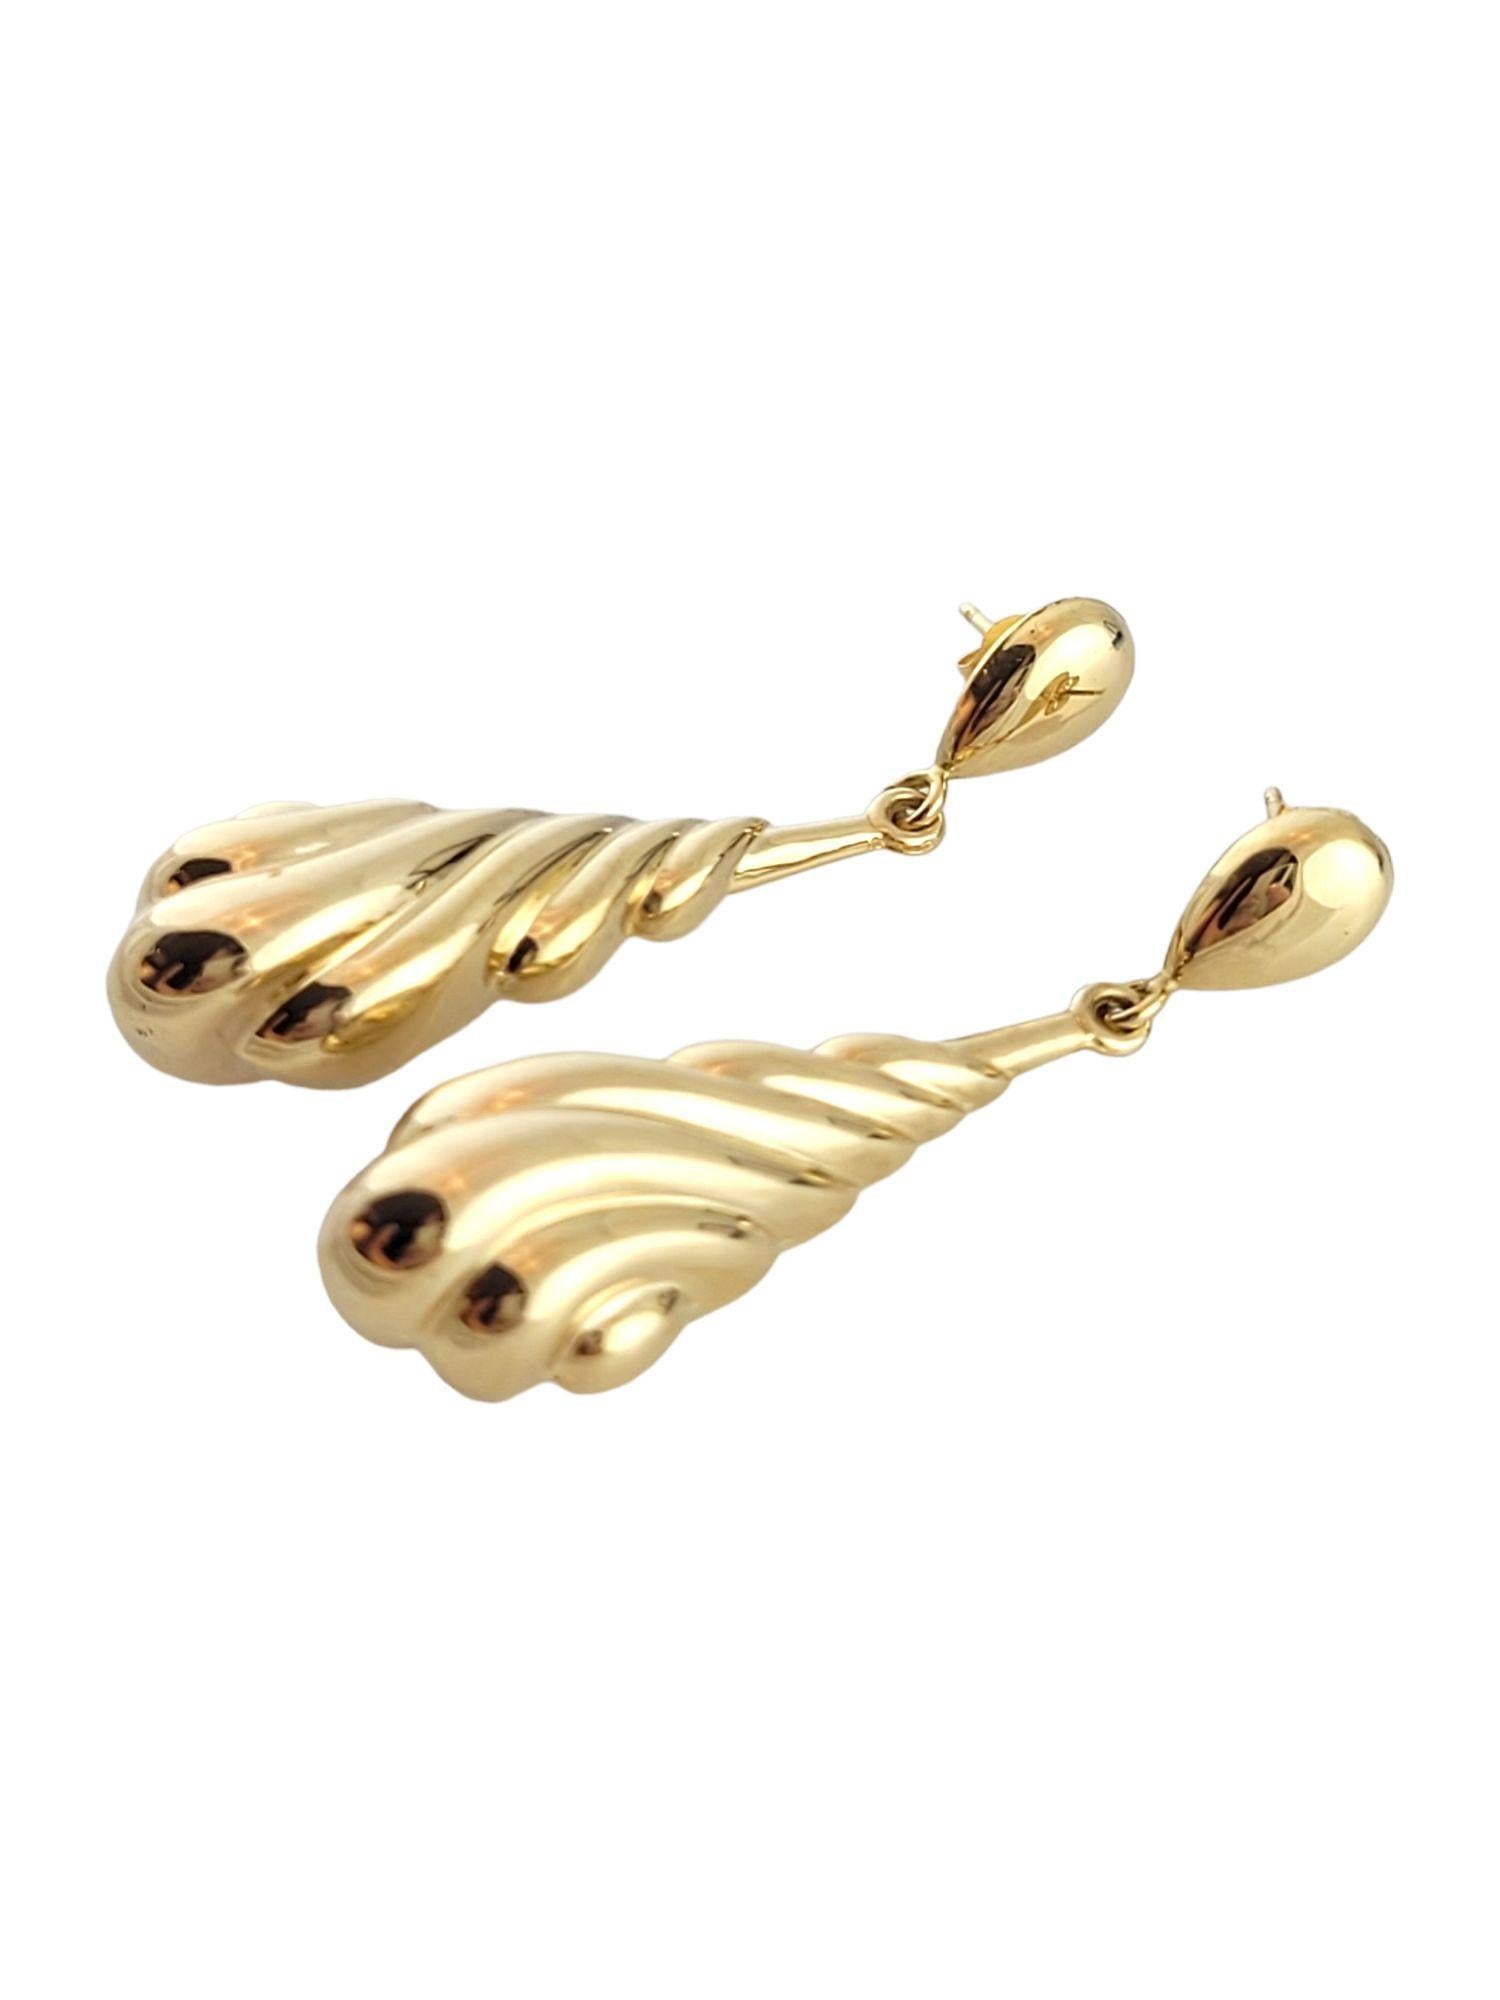 This gorgeous set of teardrop earrings are crafted from 18K yellow gold!

Size: 43.6mm X 12mm X 9.5mm

Weight: 3.38 g/ 2.1 dwt

Hallmark: 750

Very good condition, professionally polished.

Will come packaged in a gift box or pouch (when possible)